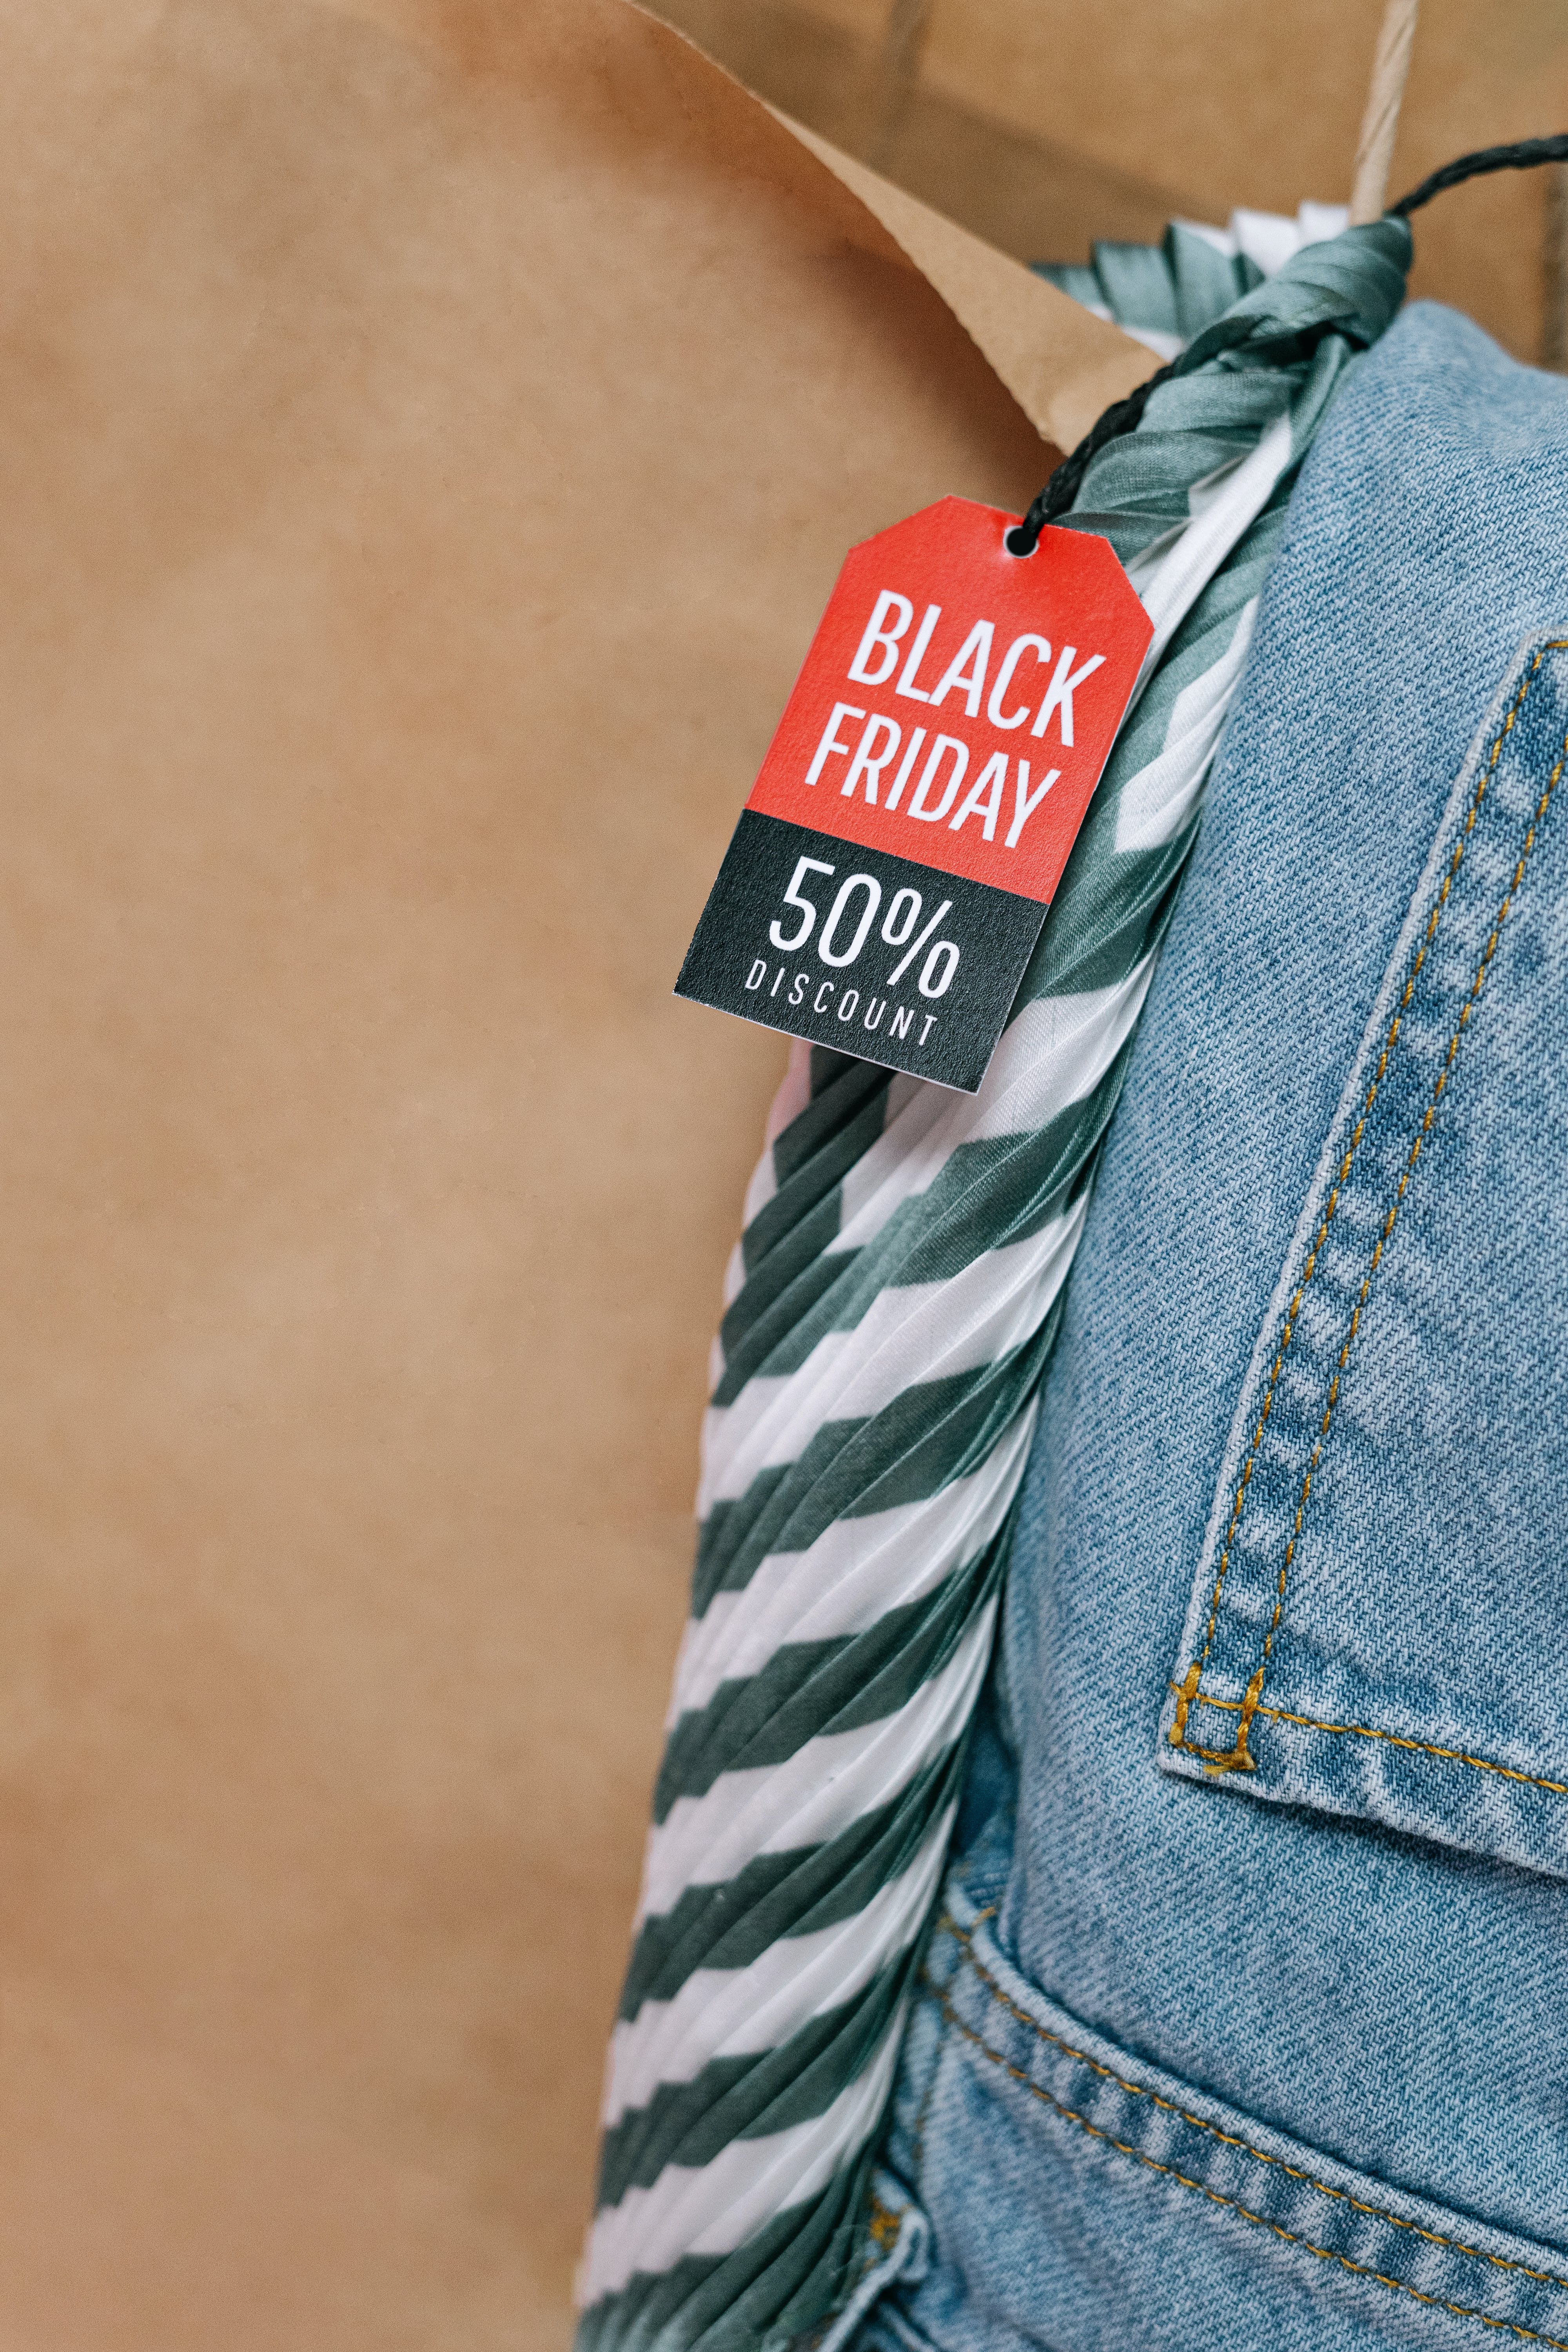 A Denim Jean with a Black Friday Tag. | Source: Pexels